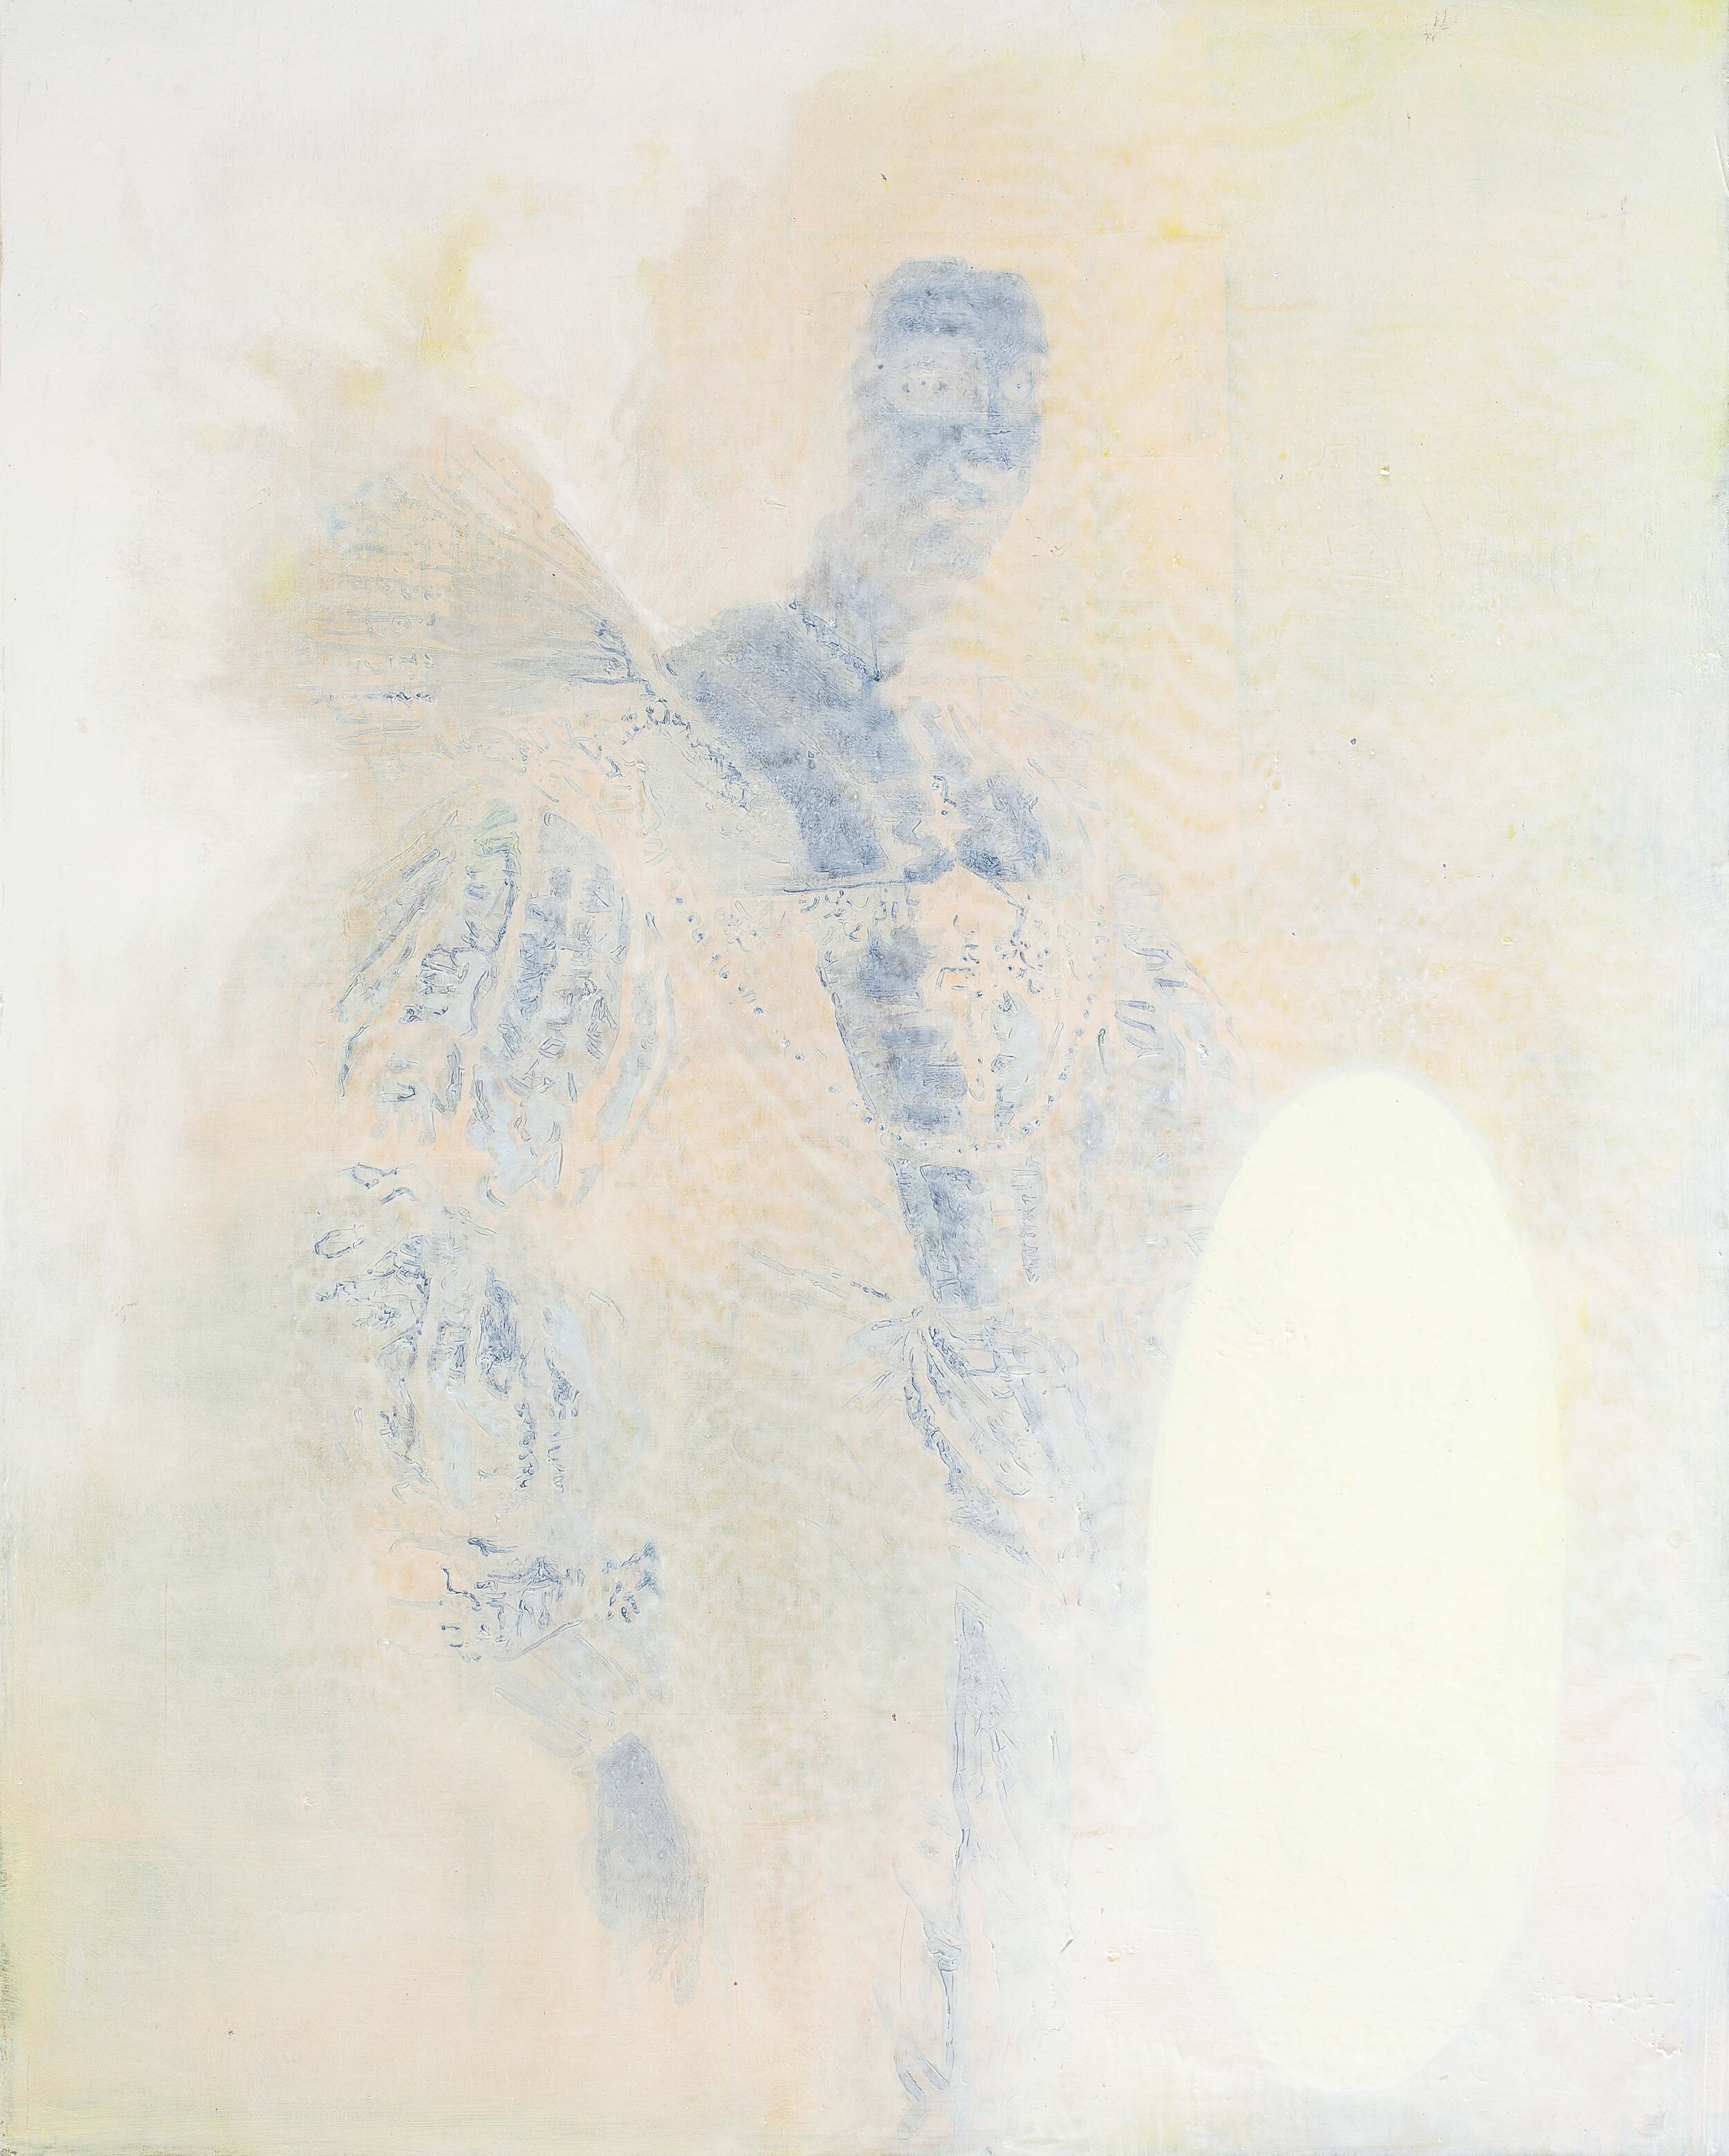 Untitled (2011), oil on canvas, 116x92 cm